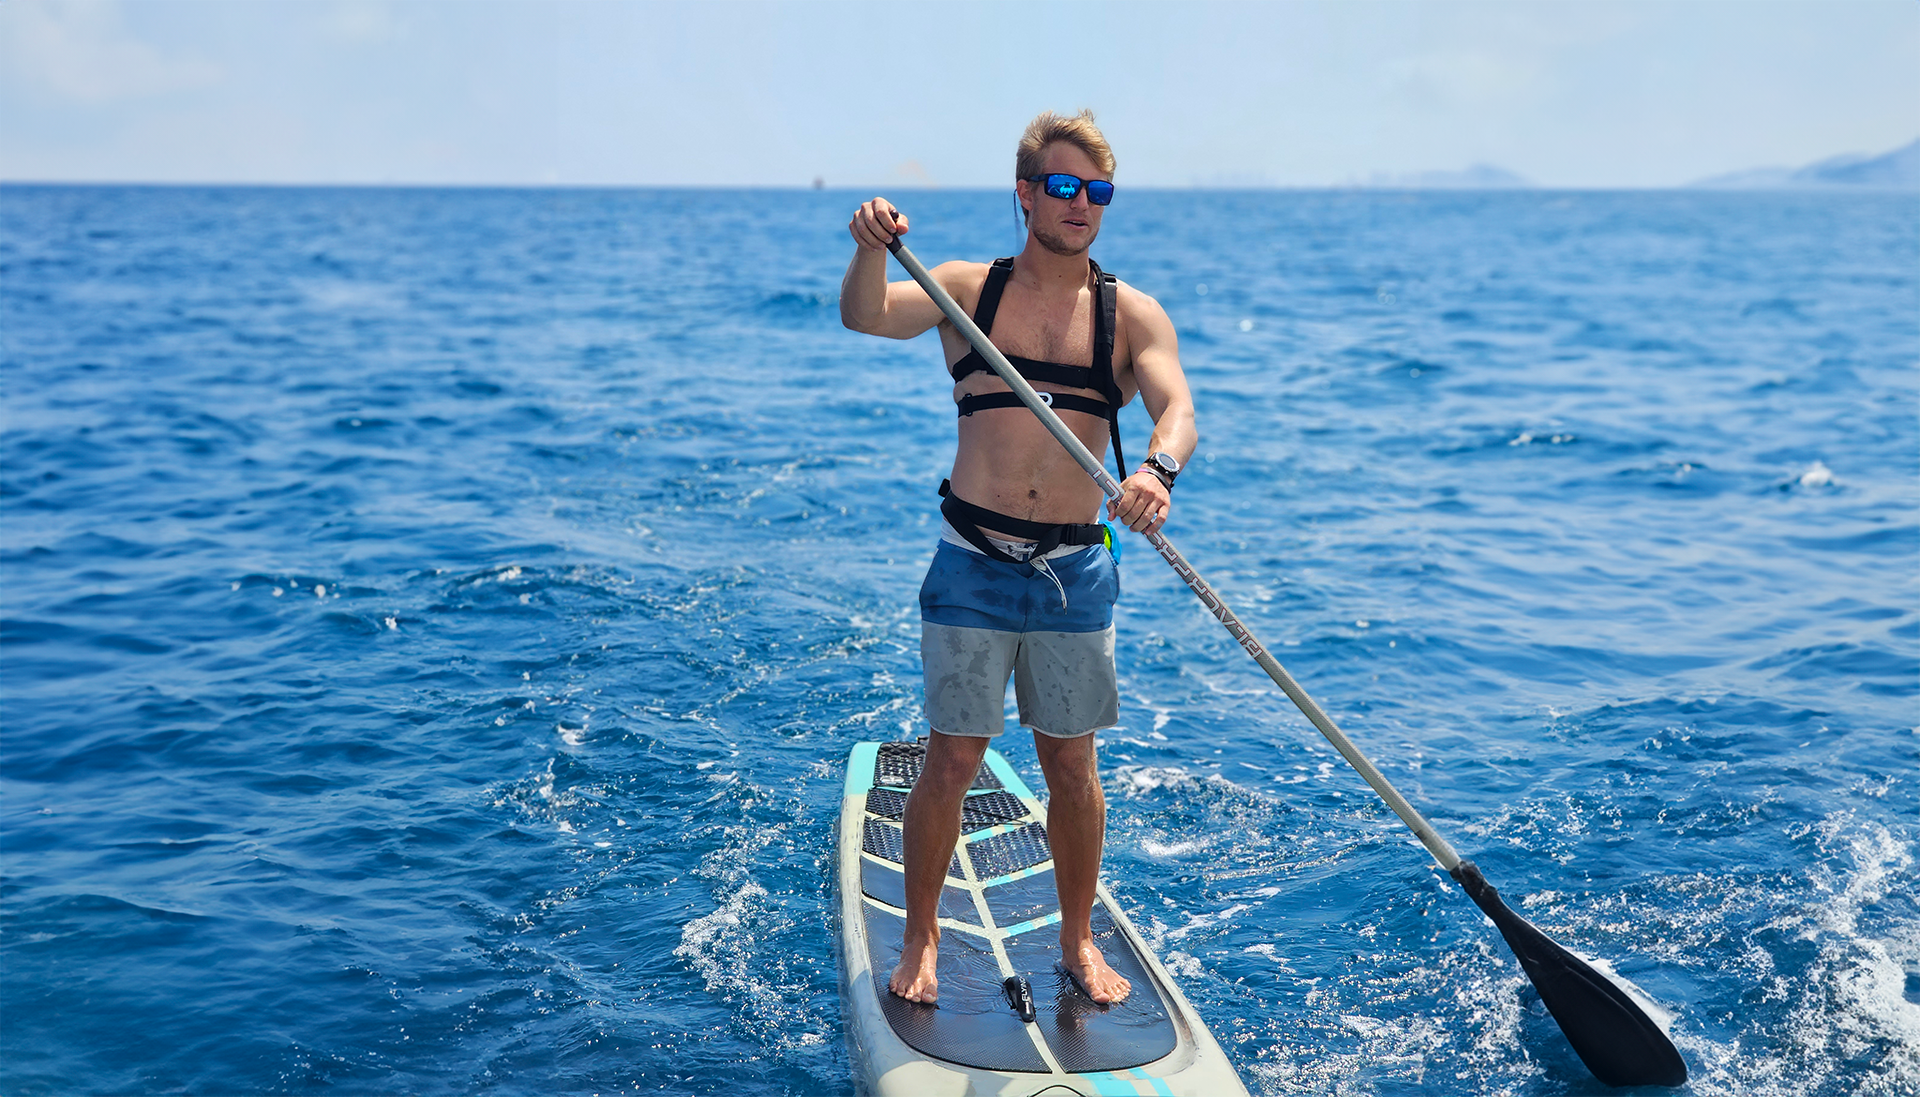 Paddleboarding for a Cause: The 2023 Crossing for Cystic Fibrosis